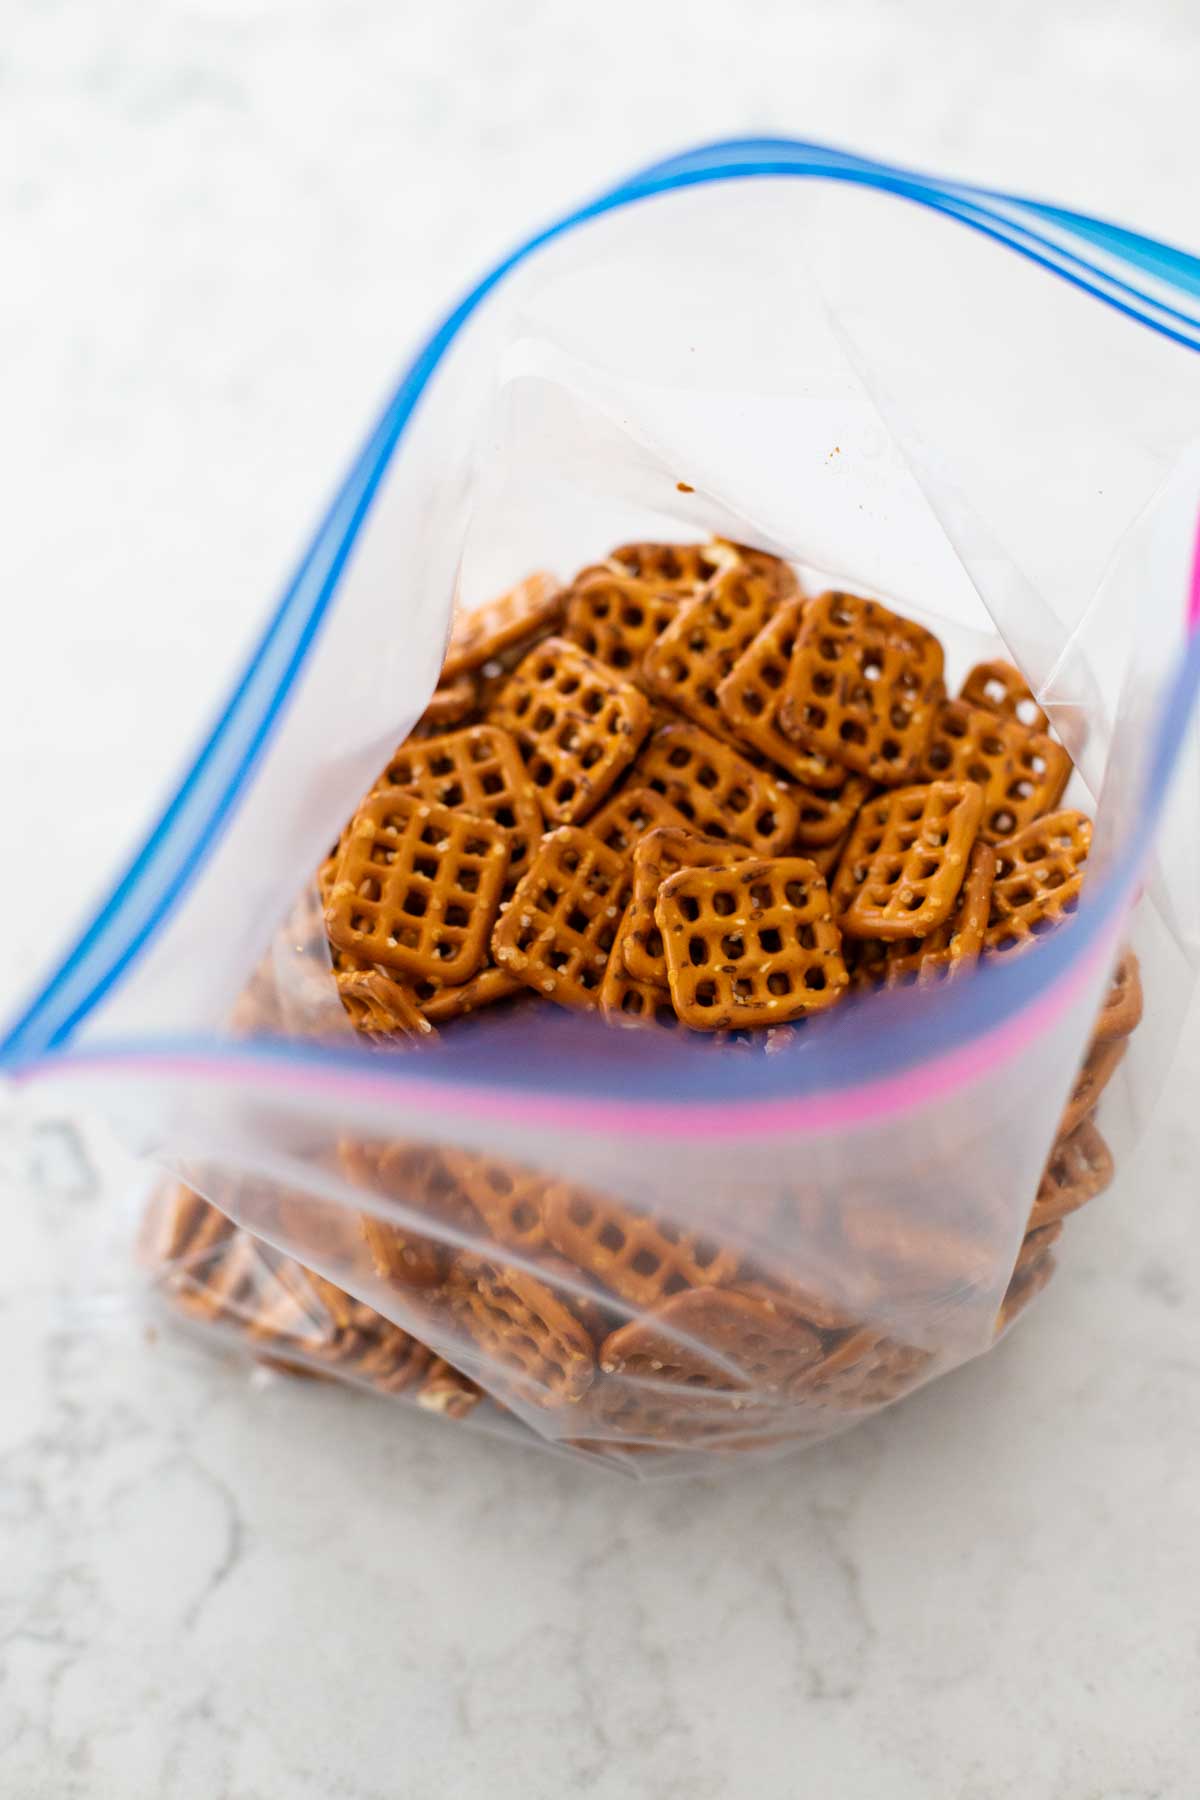 The pretzels have been poured into a large plastic ziptop bag.